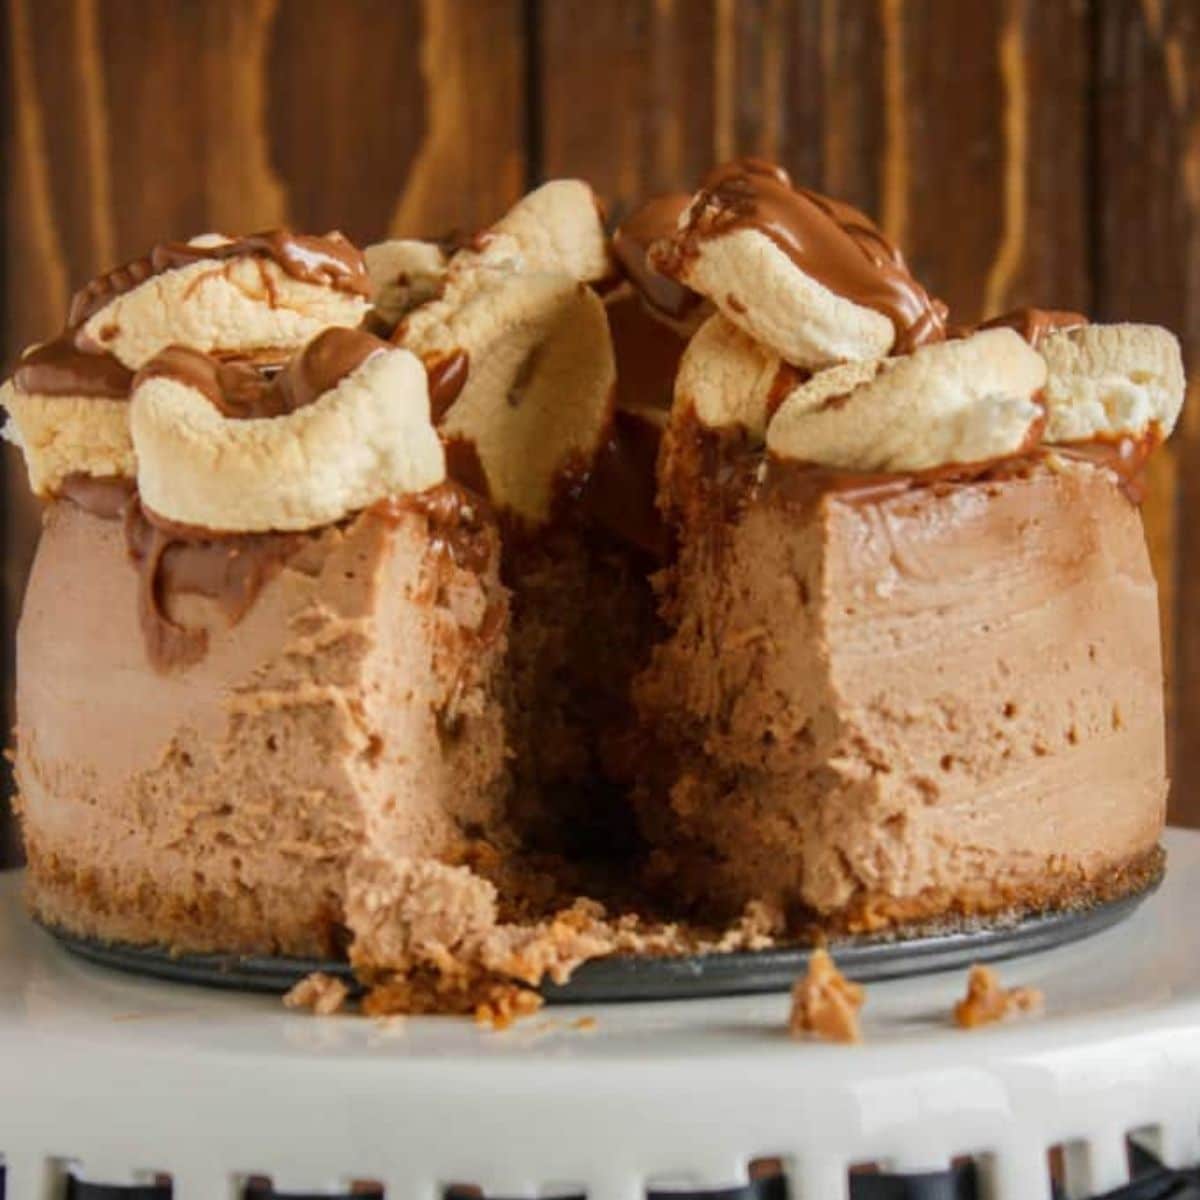 https://thecookiewriter.com/wp-content/uploads/2015/06/smores-cheesecake-featured.jpg